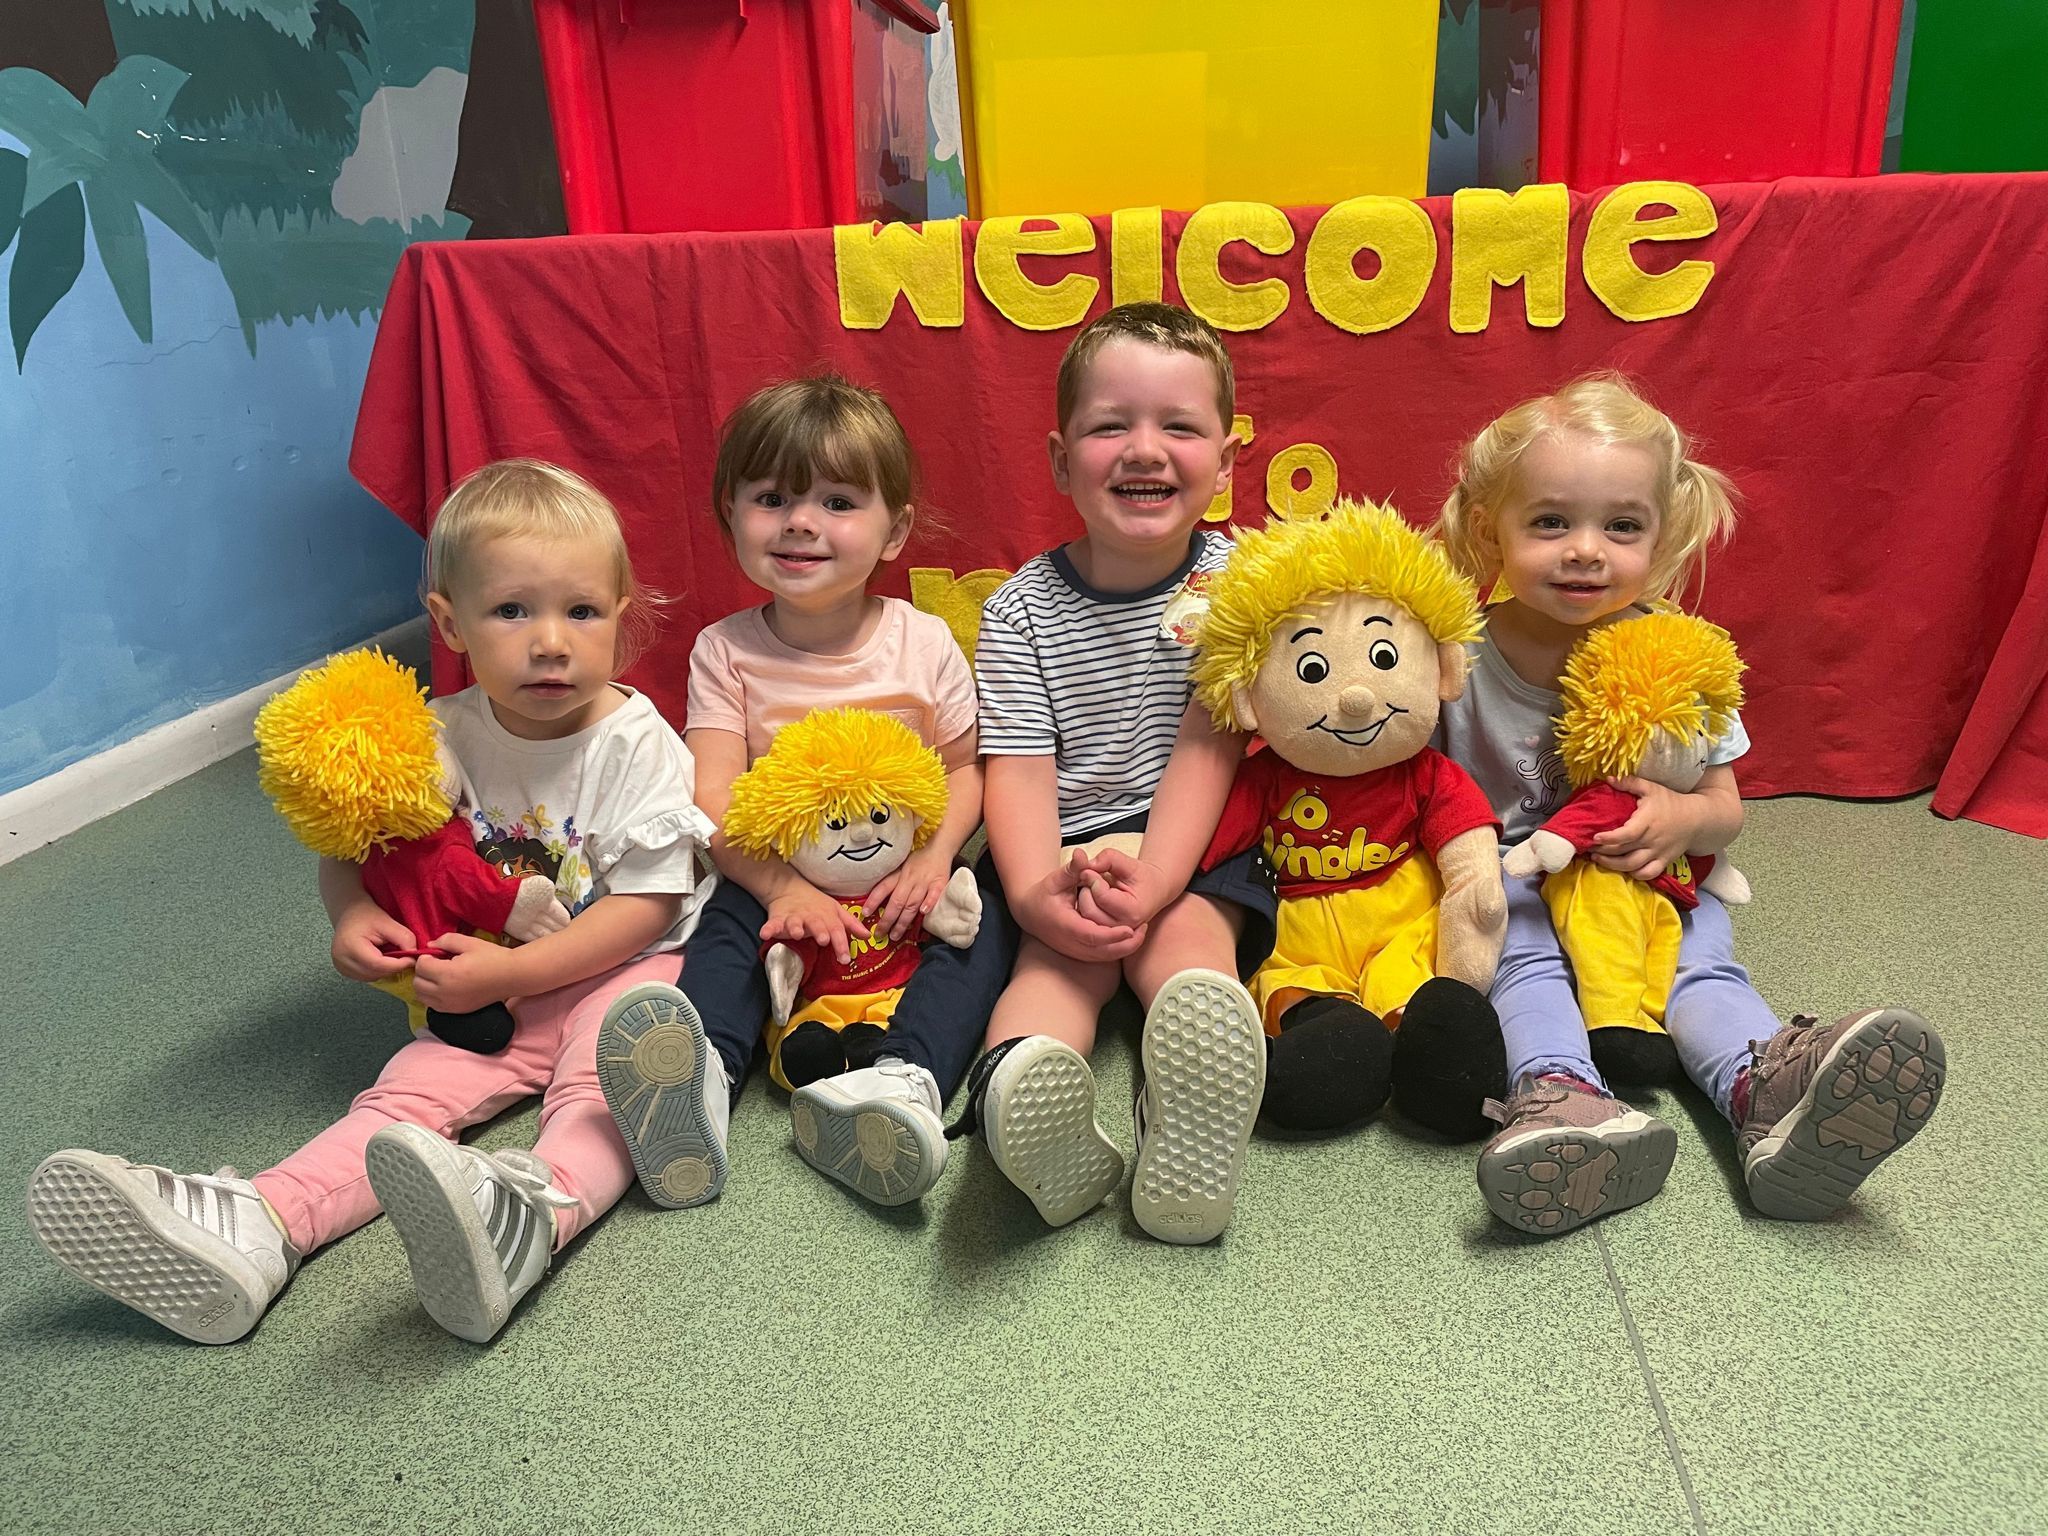 Fran has welcomed babies and toddlers to her Jo Jingles classes for 27 years